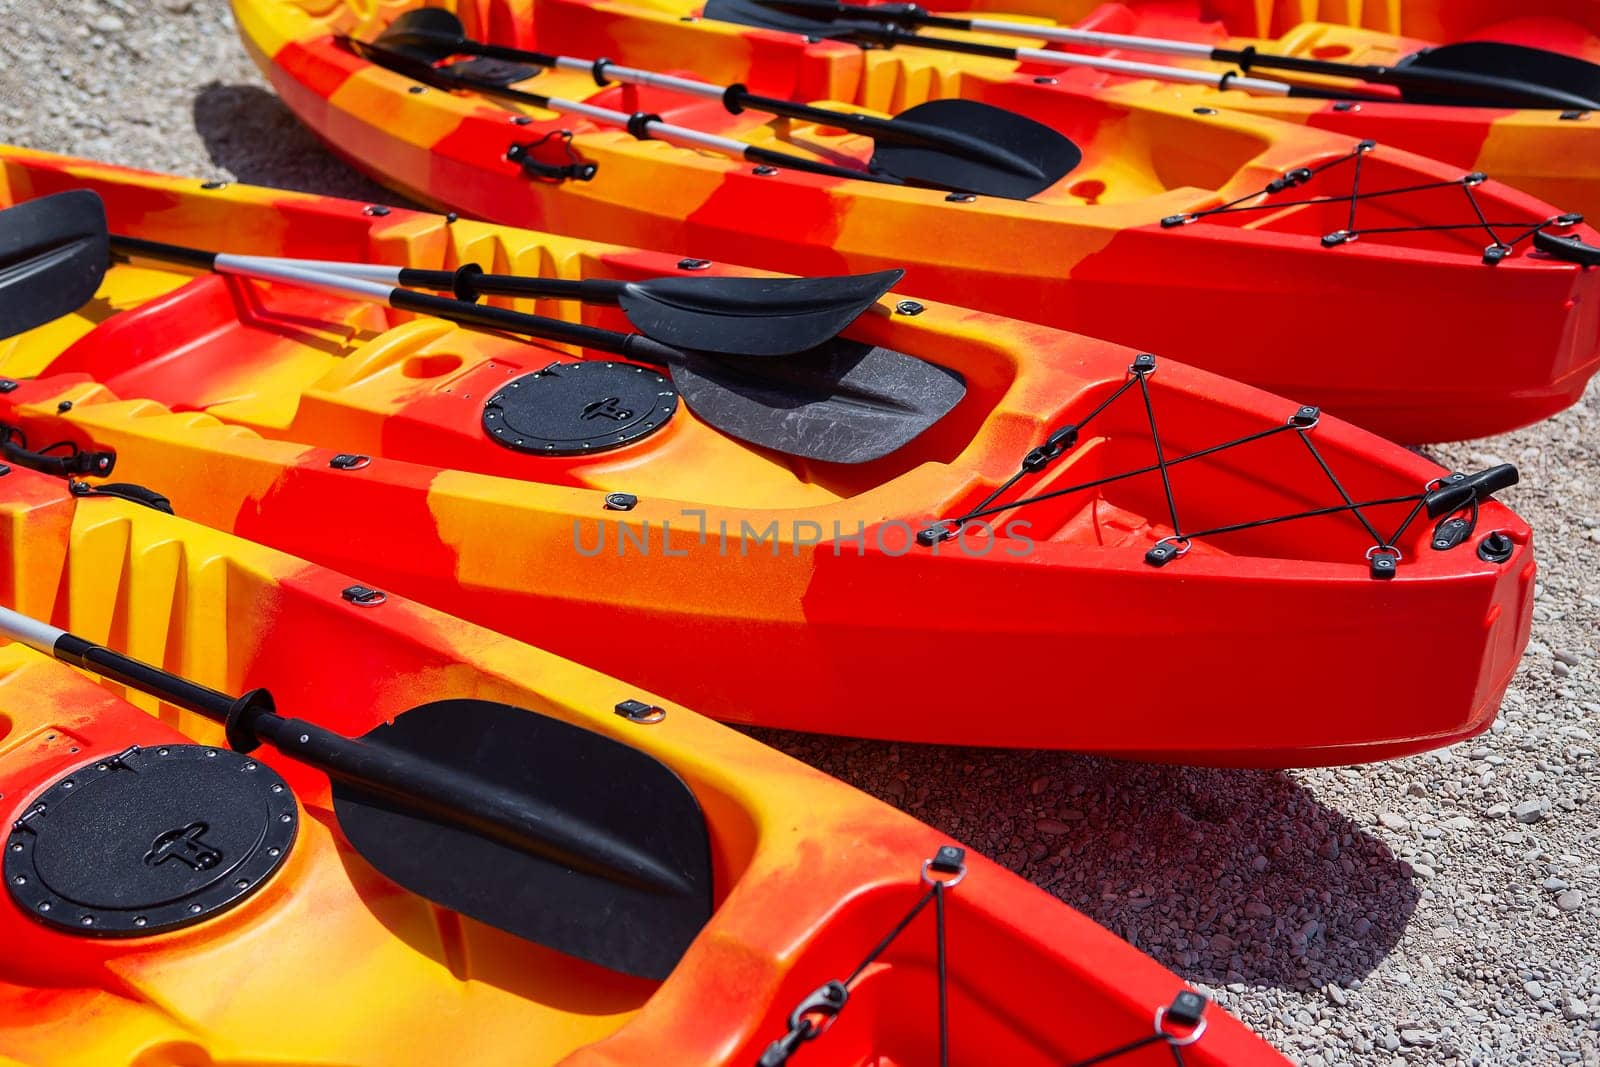 Leisure activities, sports, kayaking. Boat for water rafting. There are several bright orange kayaks on the sandy beach